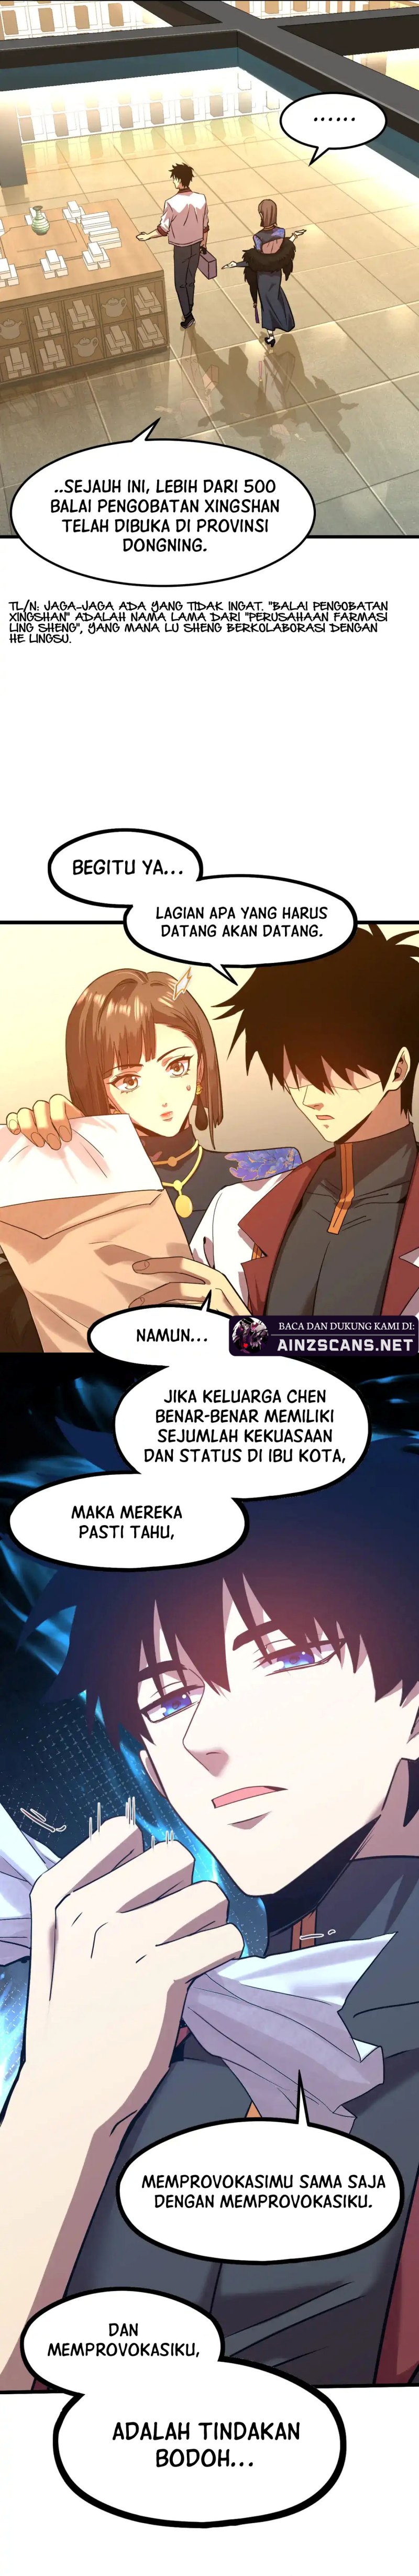 Leveling In The Future (Apex Future Martial Arts) Chapter 98 Image 13